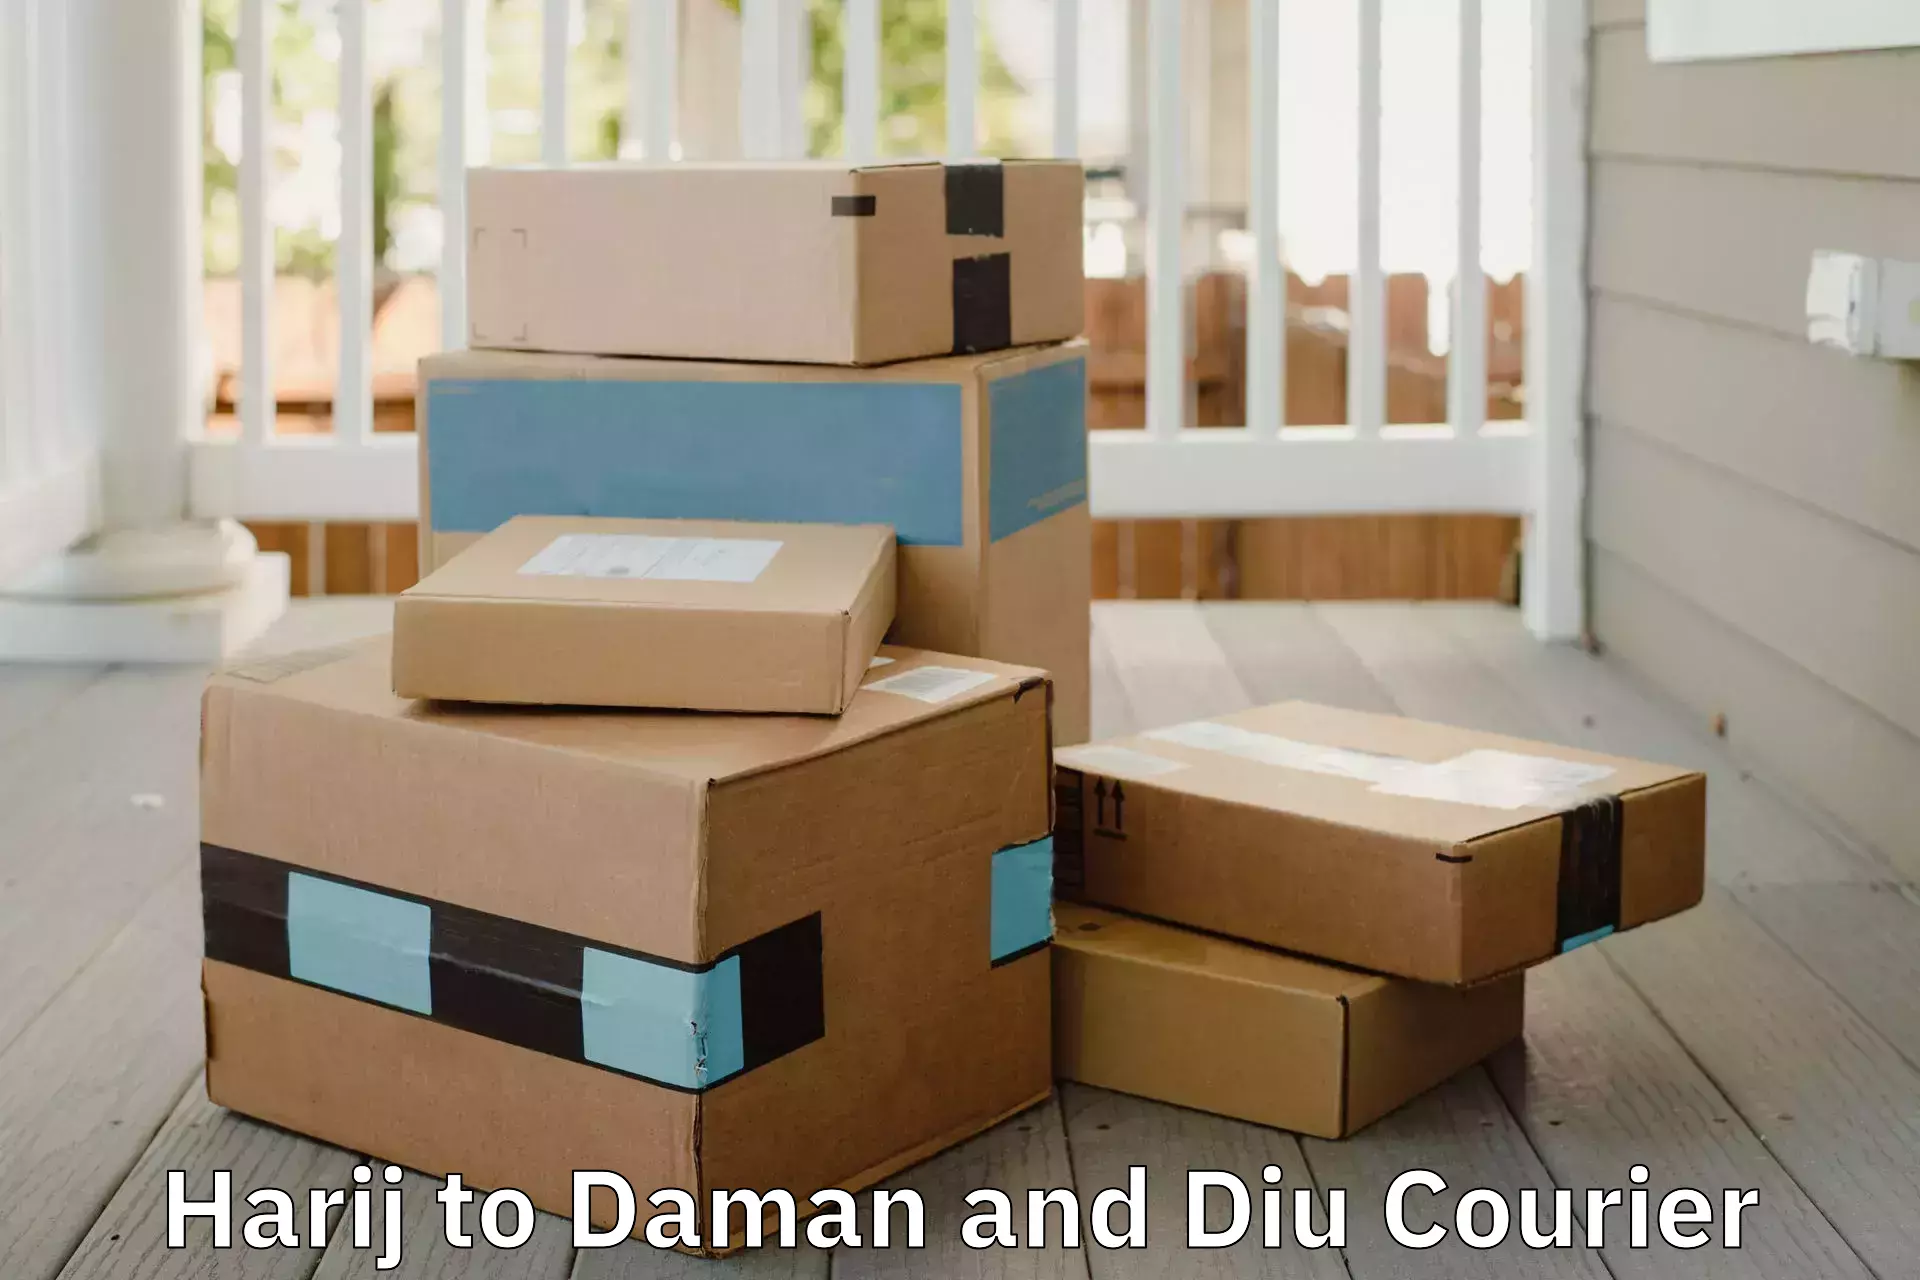 Cost-effective moving solutions Harij to Daman and Diu